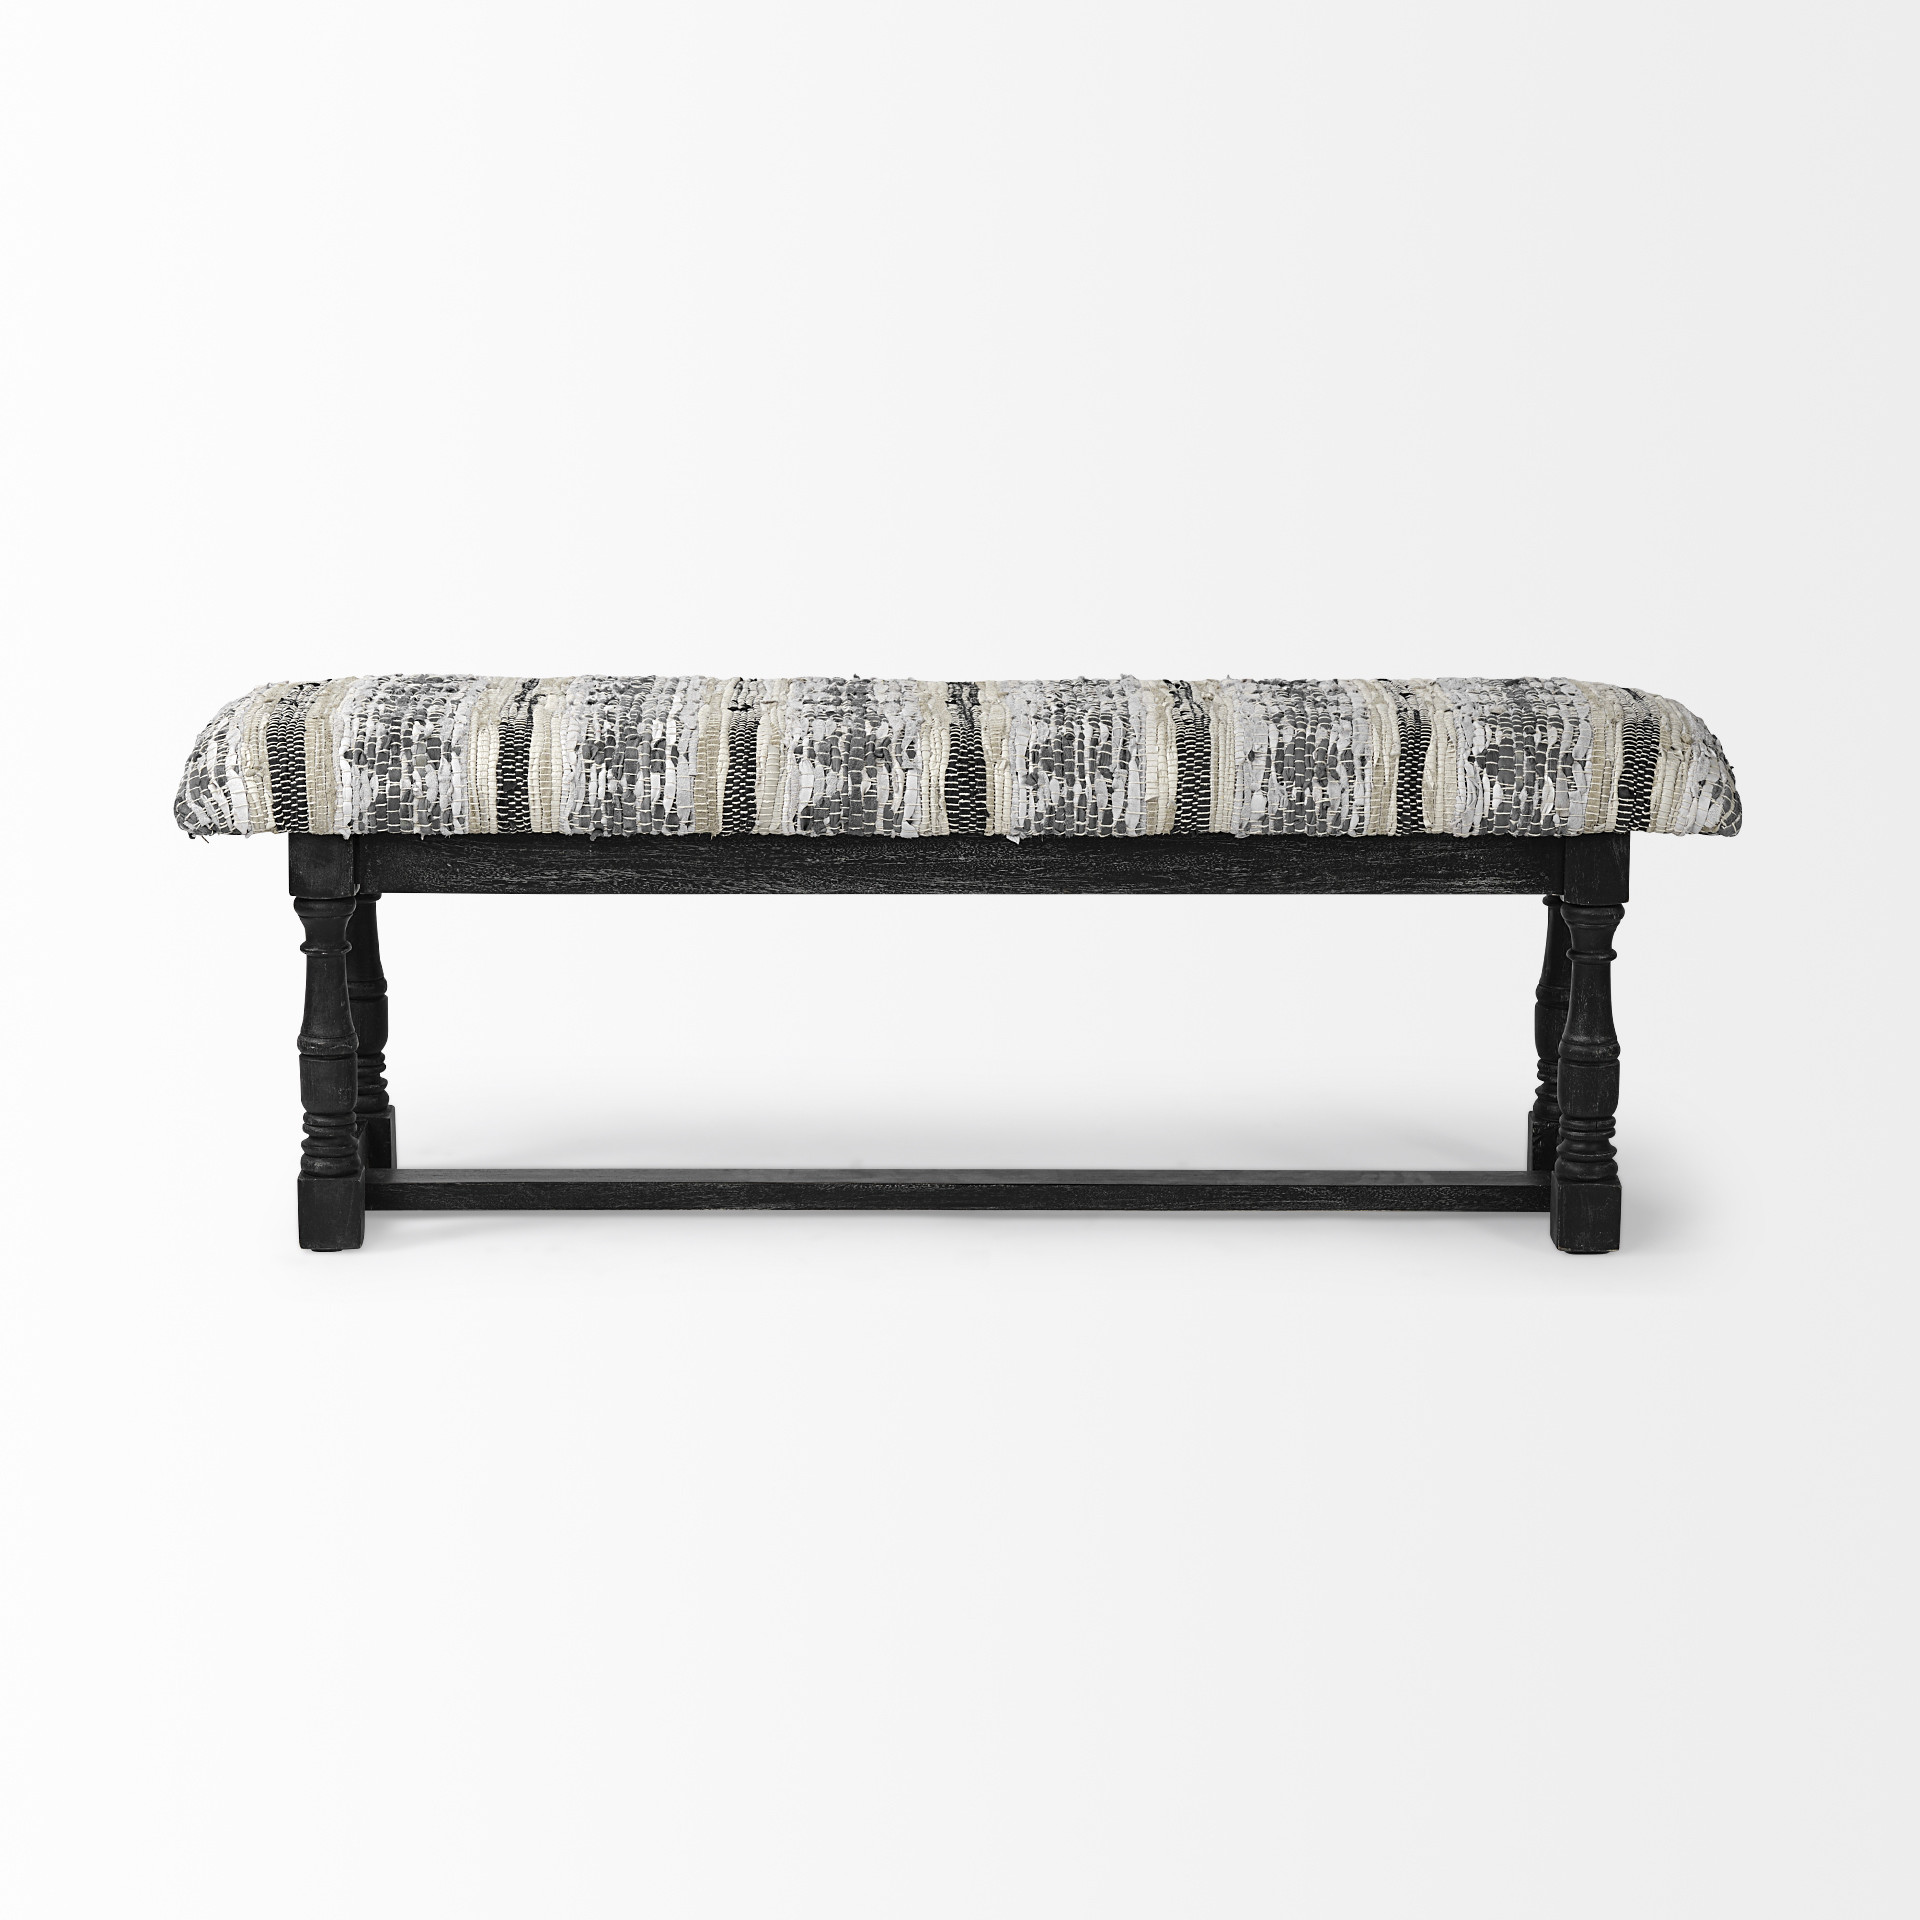 Rectangular Indian Mango Wood/Black W/ Woven-Leather Cushion Top Accent Bench